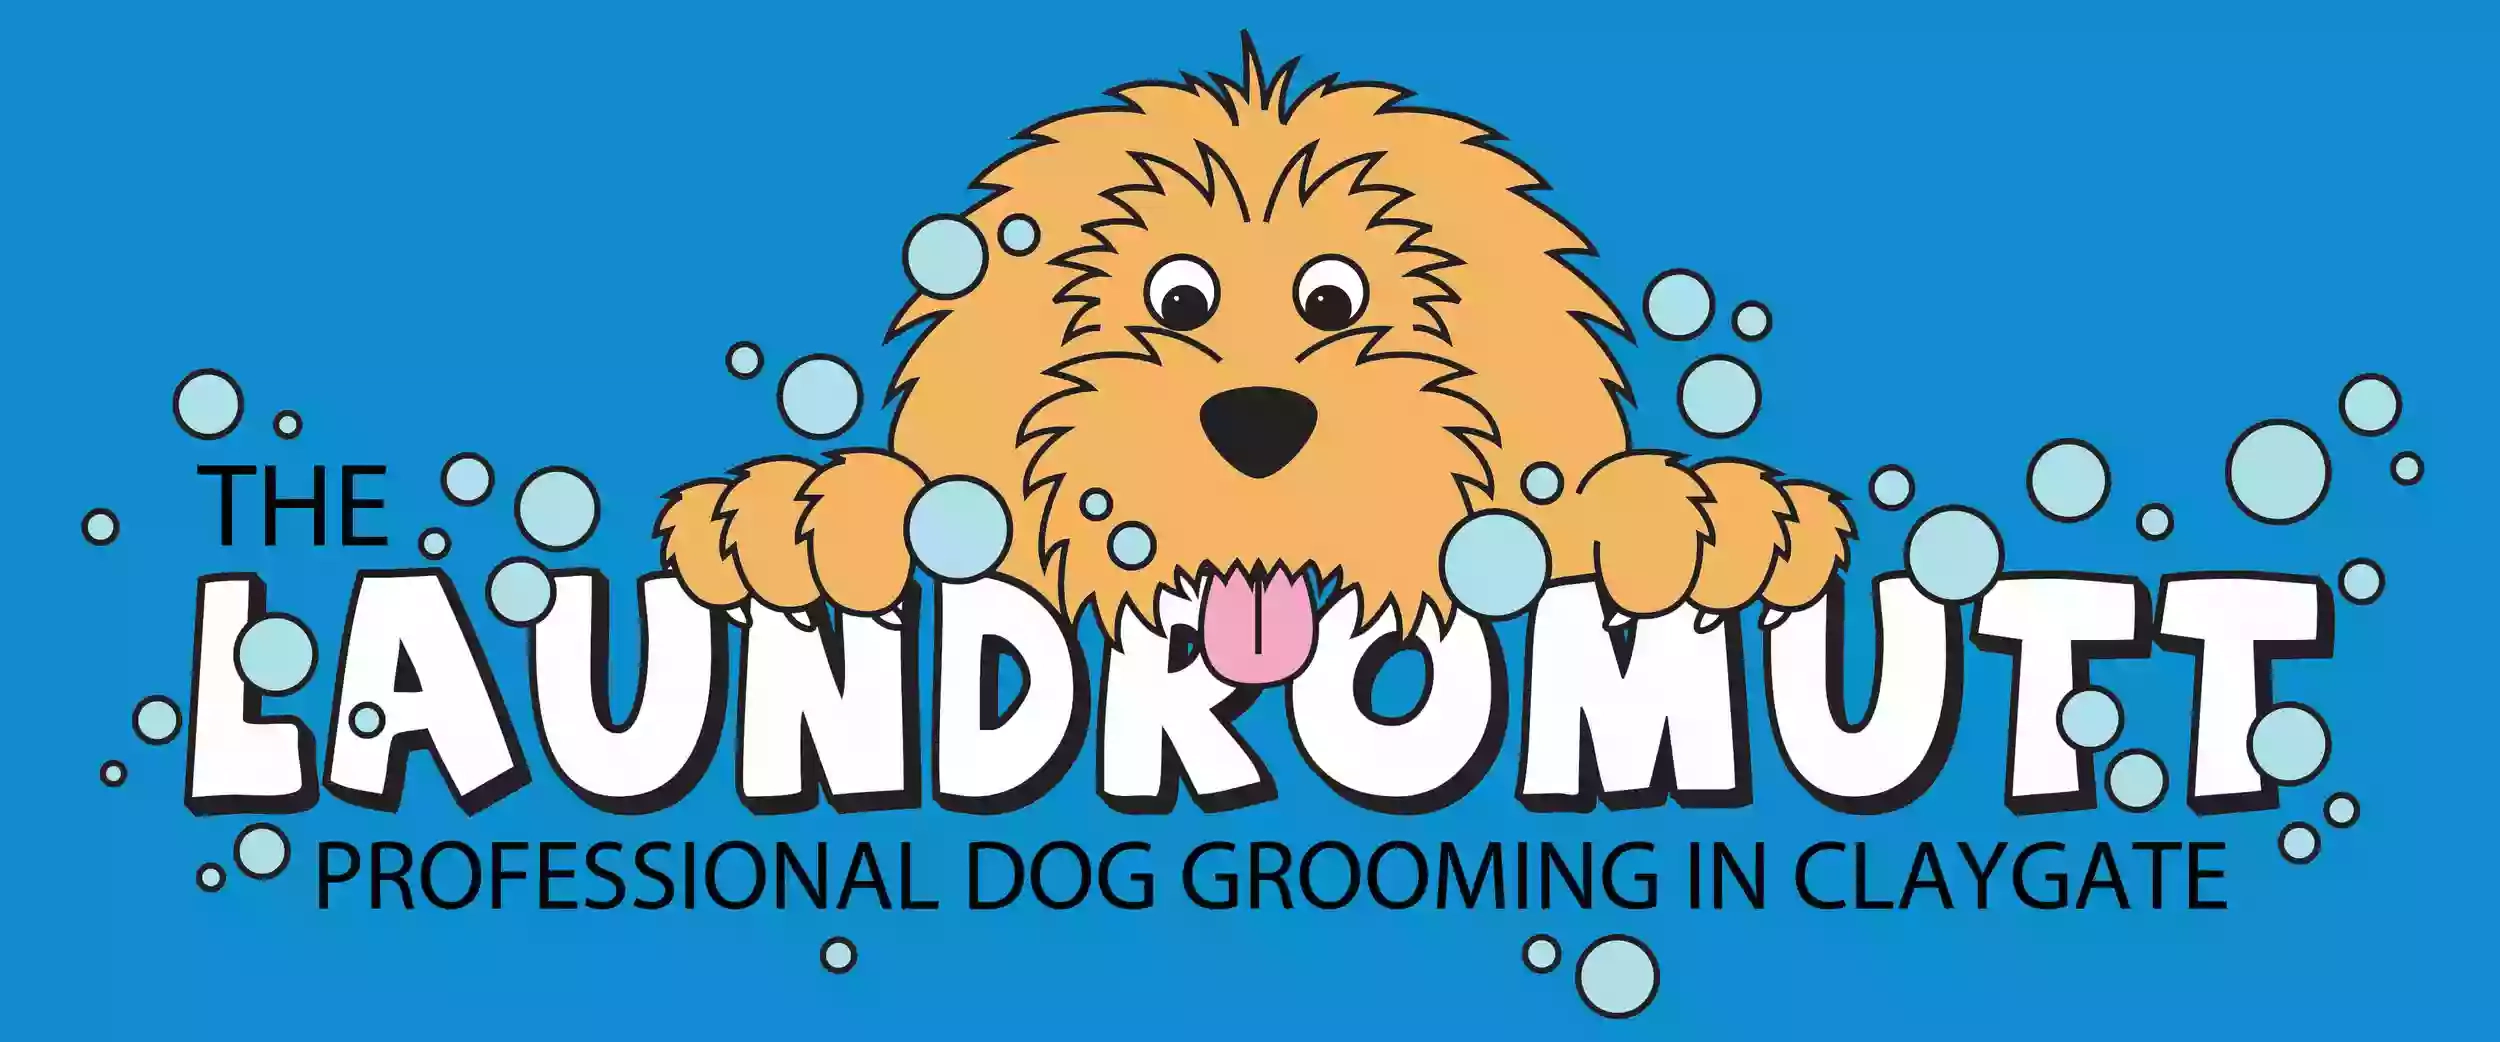 The Laundromutt Professional Dog Grooming